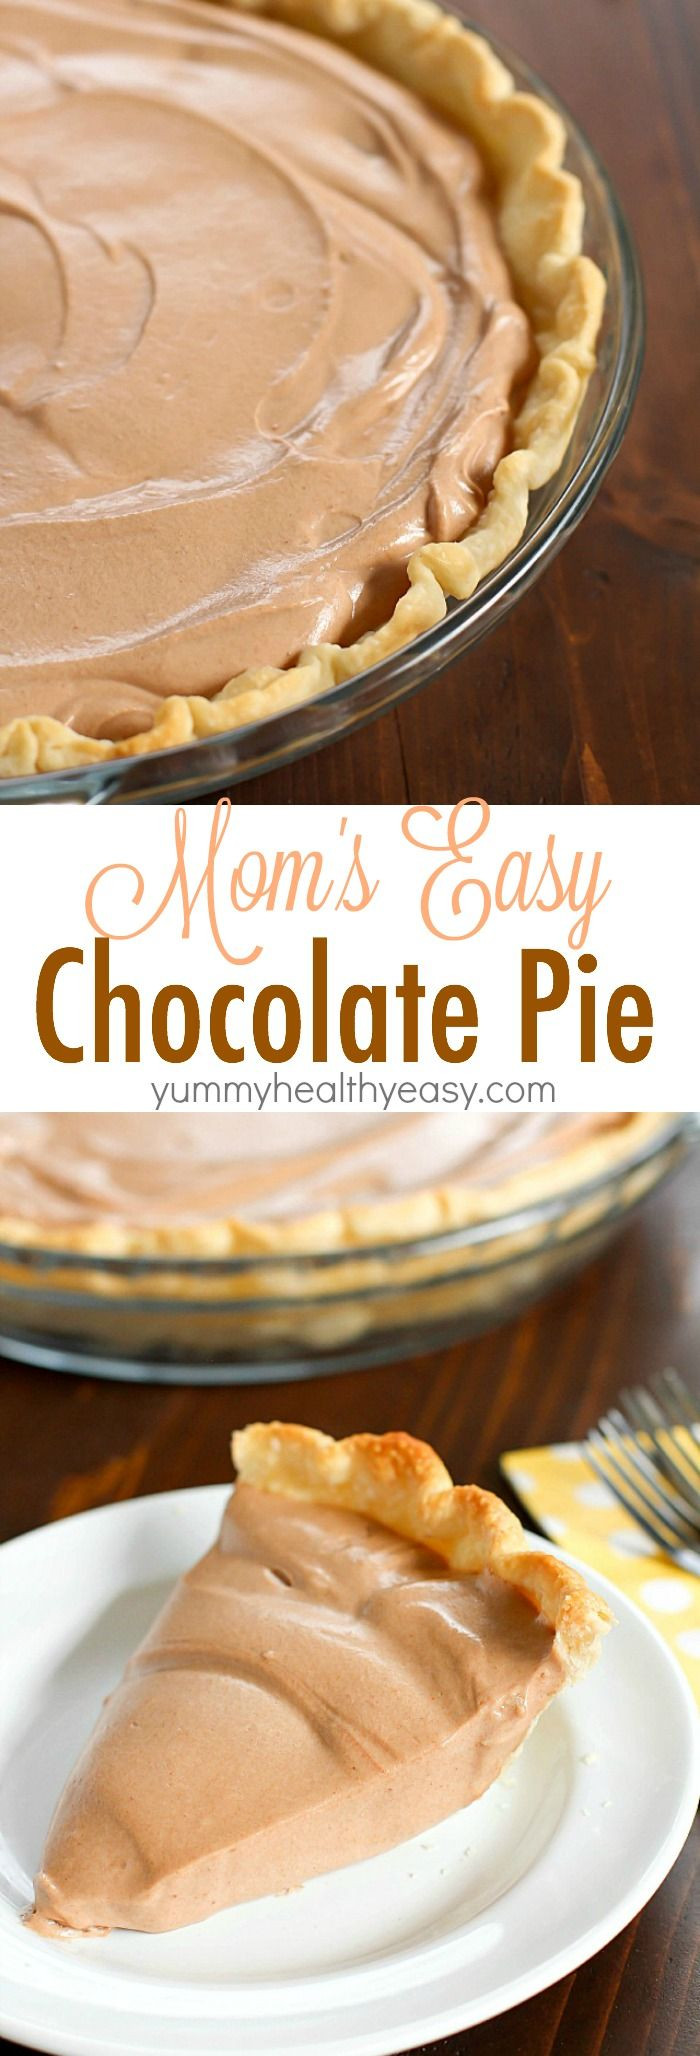 Thanksgiving Chocolate Pie
 An incredibly Easy Chocolate Pie recipe that my Mom makes